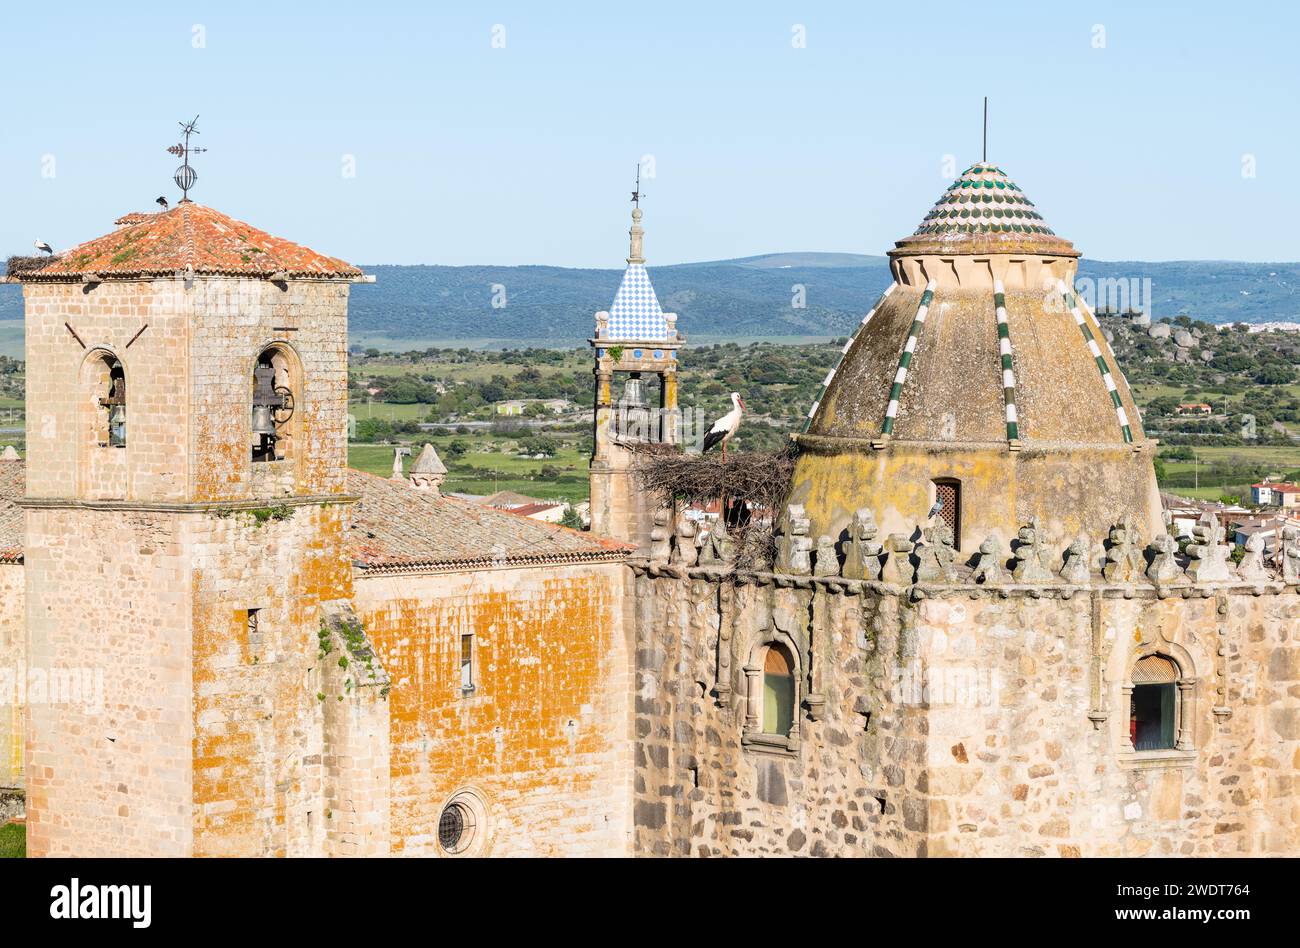 Nesting storks on the the Iglesia de San Martin, on the left and centre, and Torre del Alfiler, on the right, Trujillo, Caceres, Extremadura, Spain Stock Photo